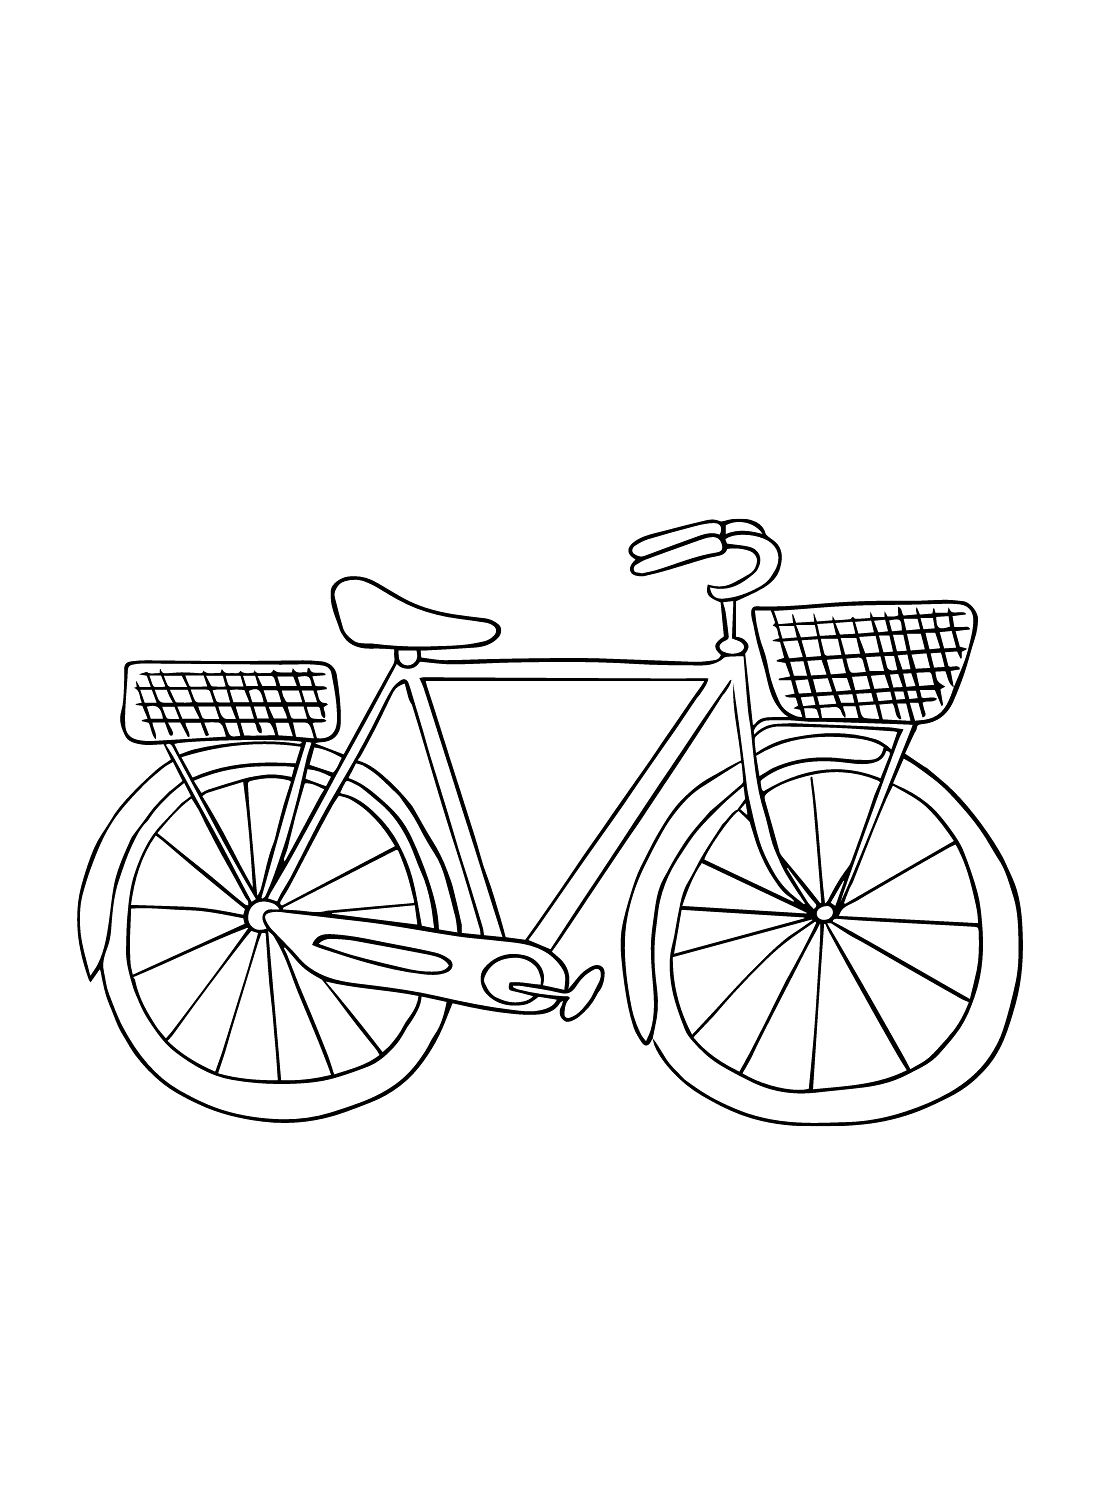 Bicycle Simple Coloring Page